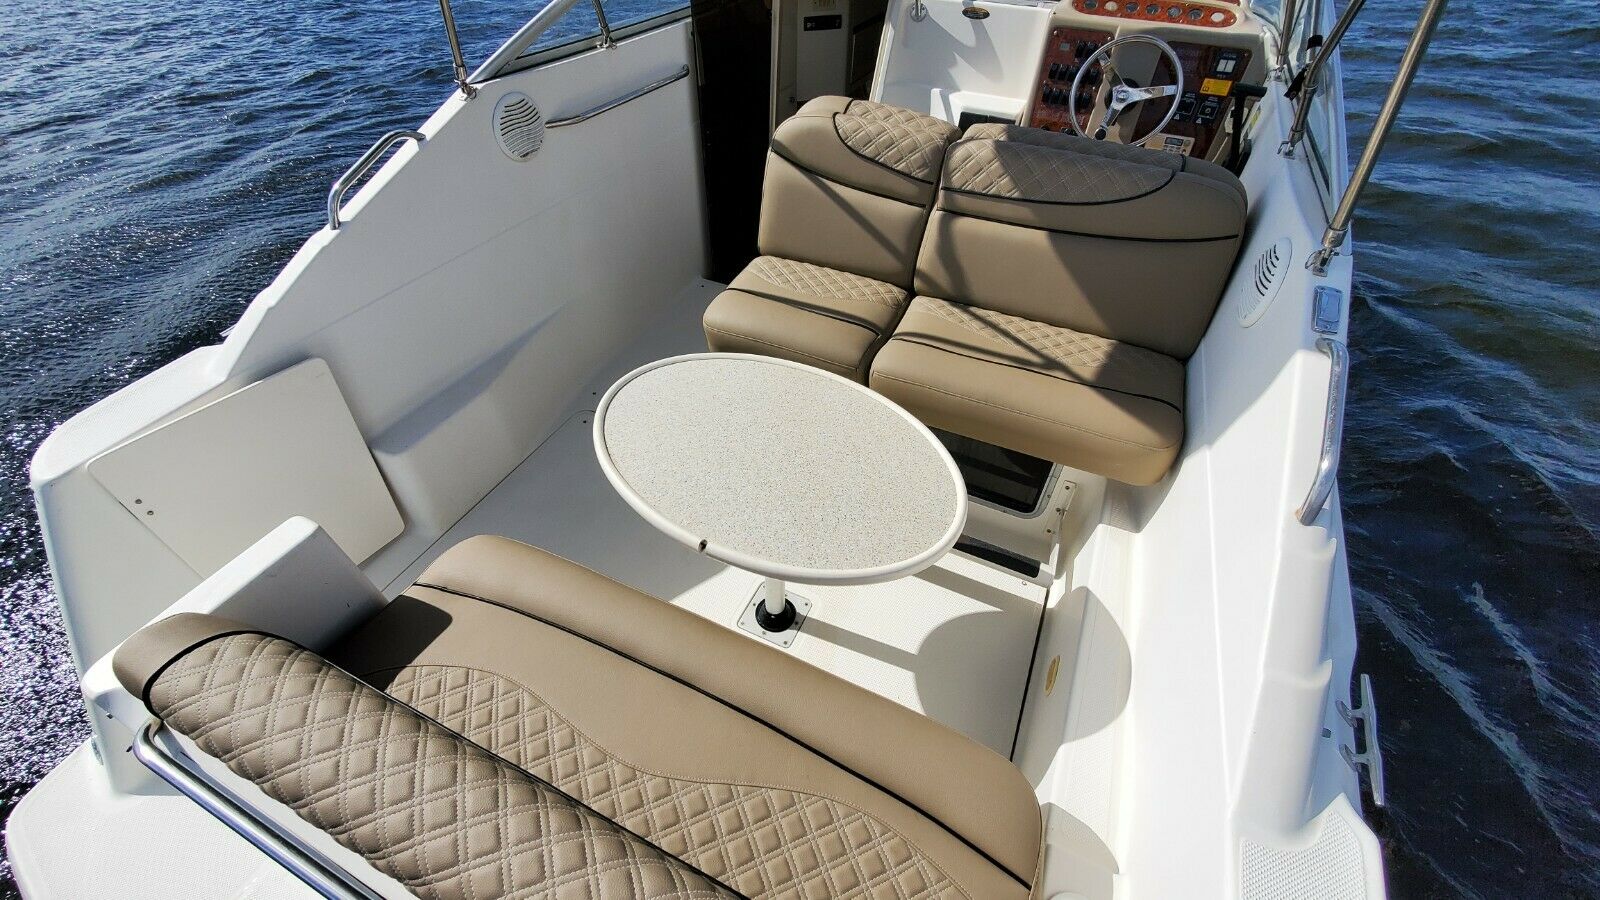 Maxum 2400 2000 for sale for $14,900 - Boats-from-USA.com